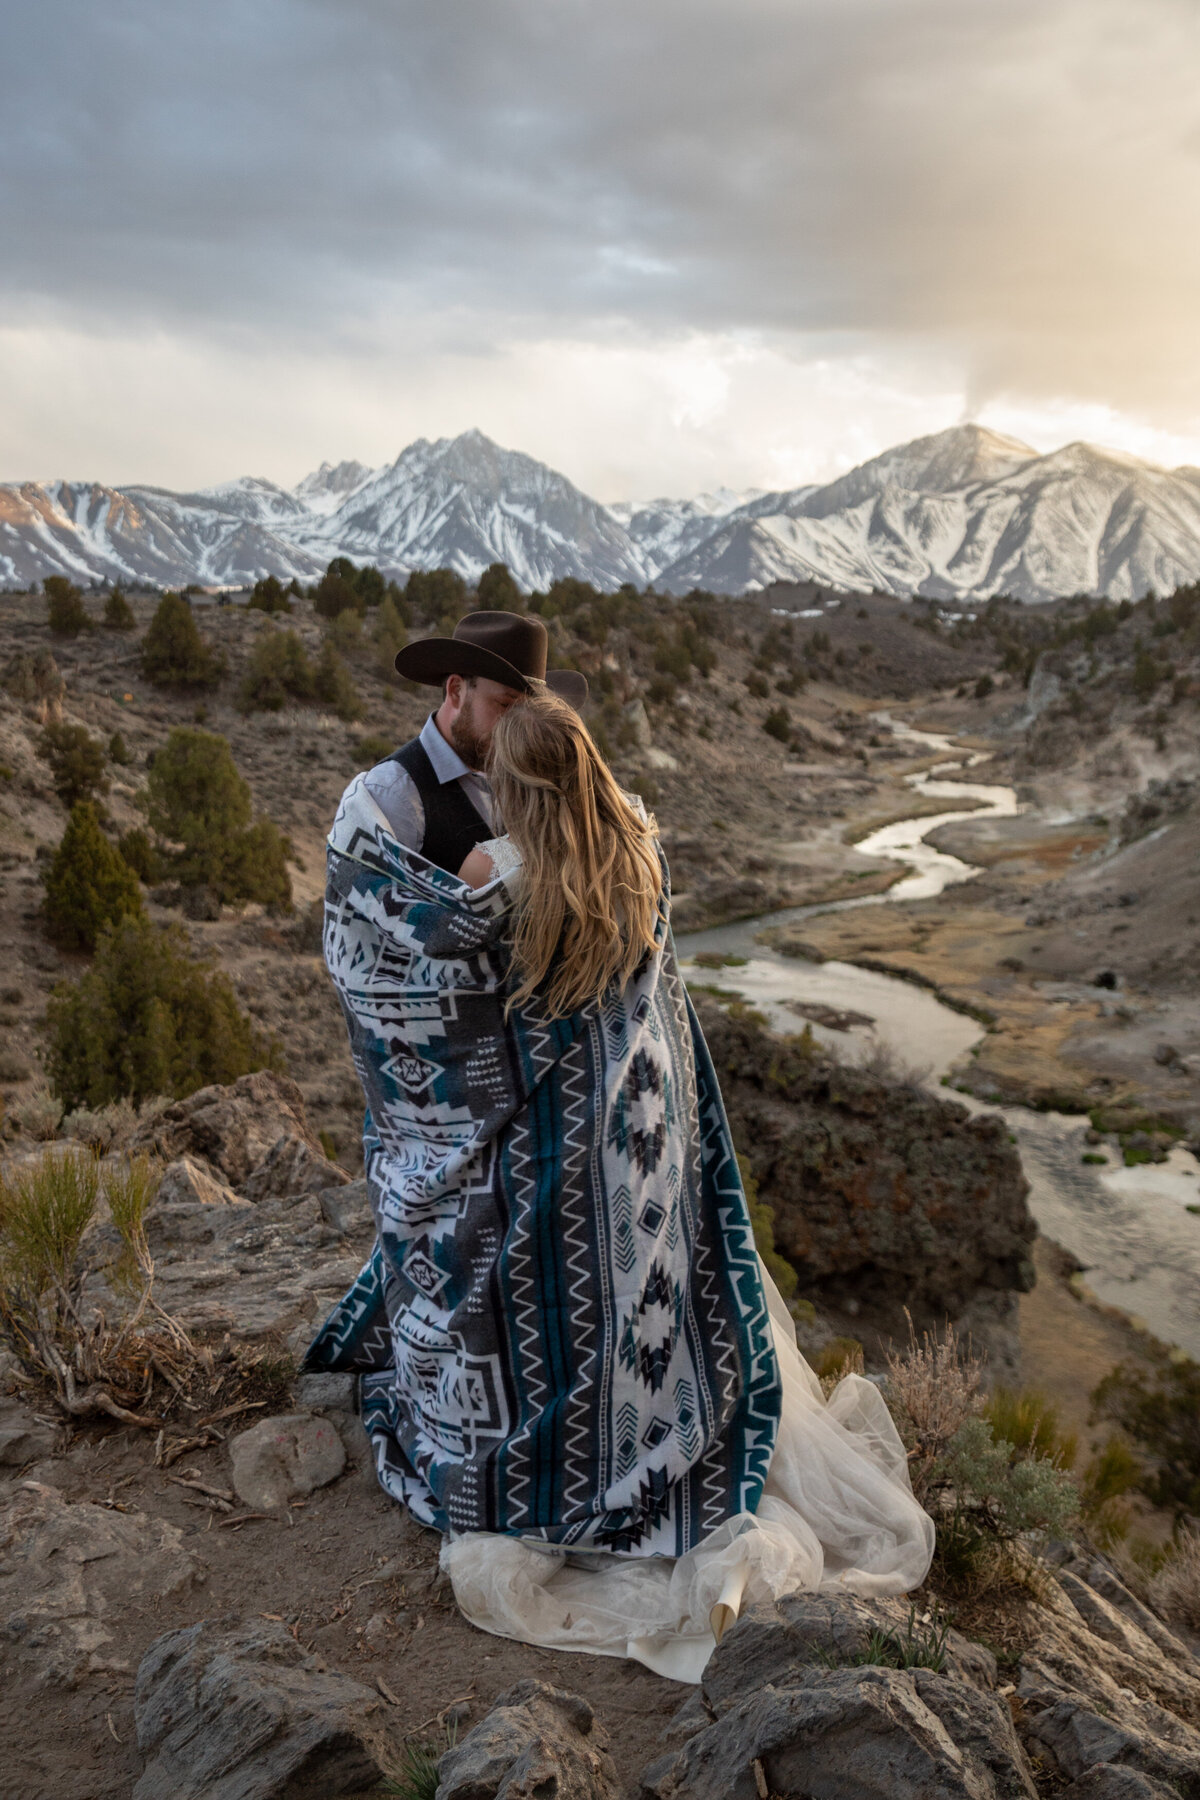 A bride and groom stand cuddled up together under a blanket as they watch the sunset over the mountains in the Eastern Sierra.